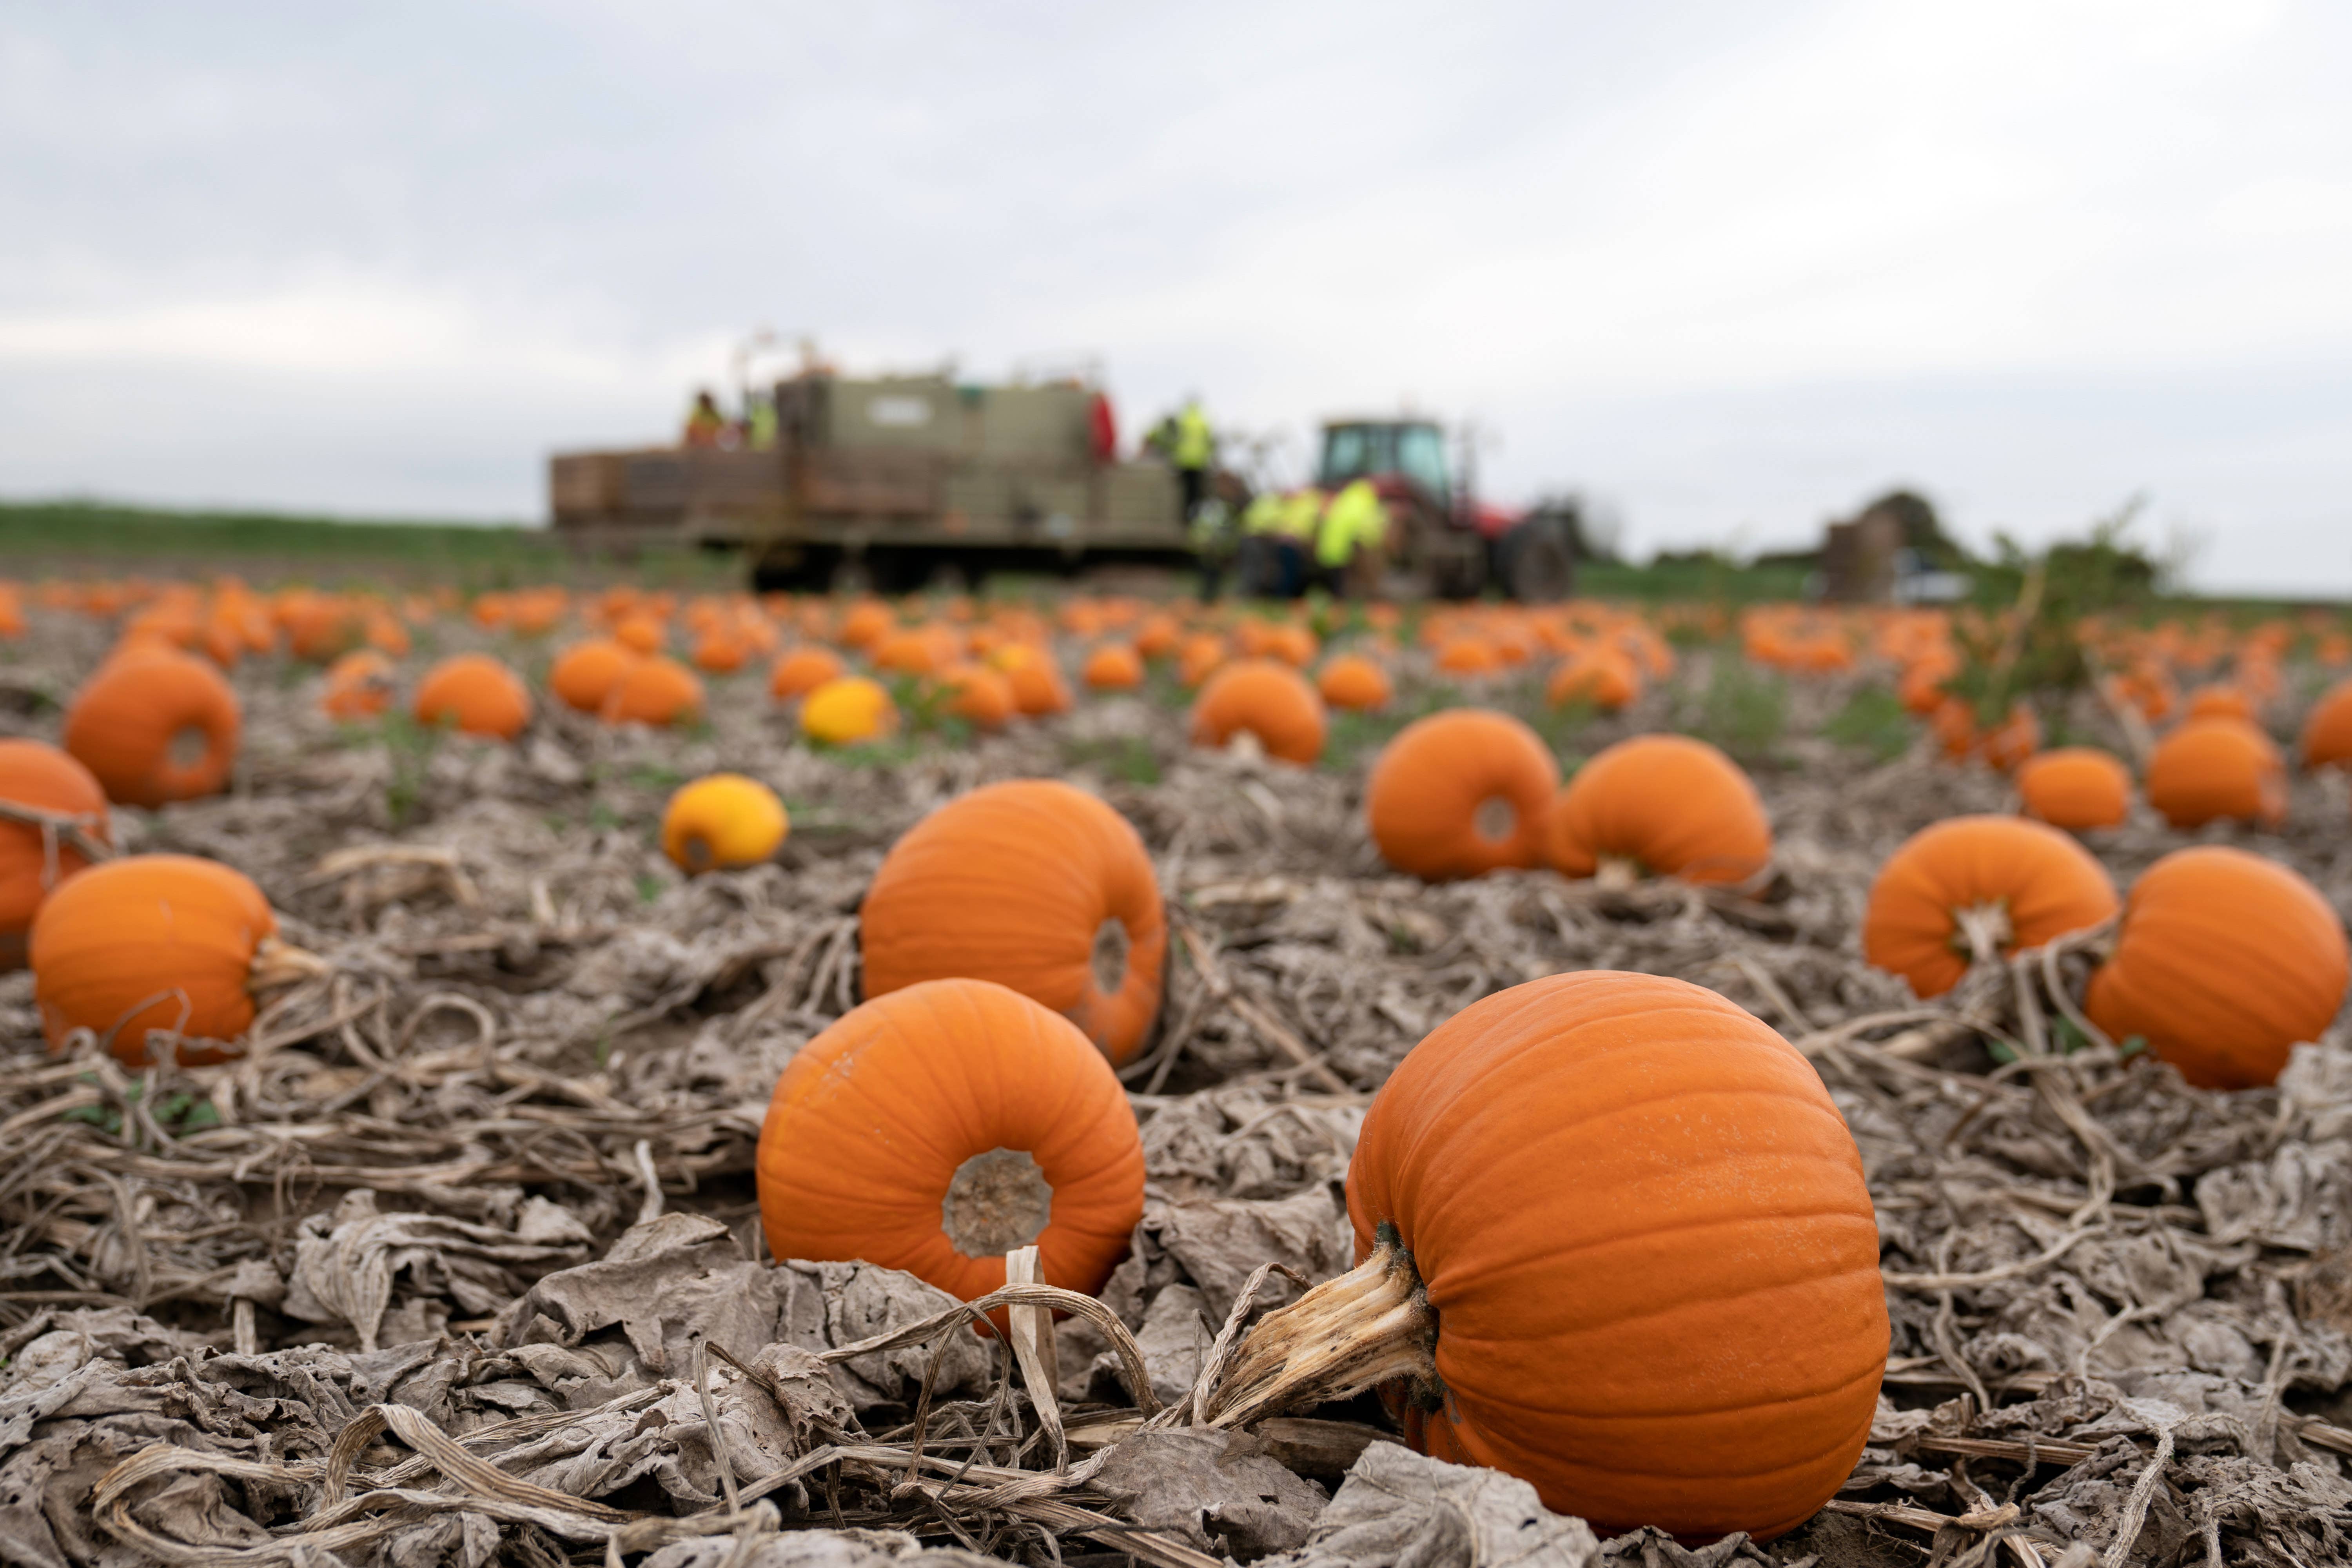 The wet weather has been key to a bumper crop of pumpkins this year (Joe Giddens/PA)